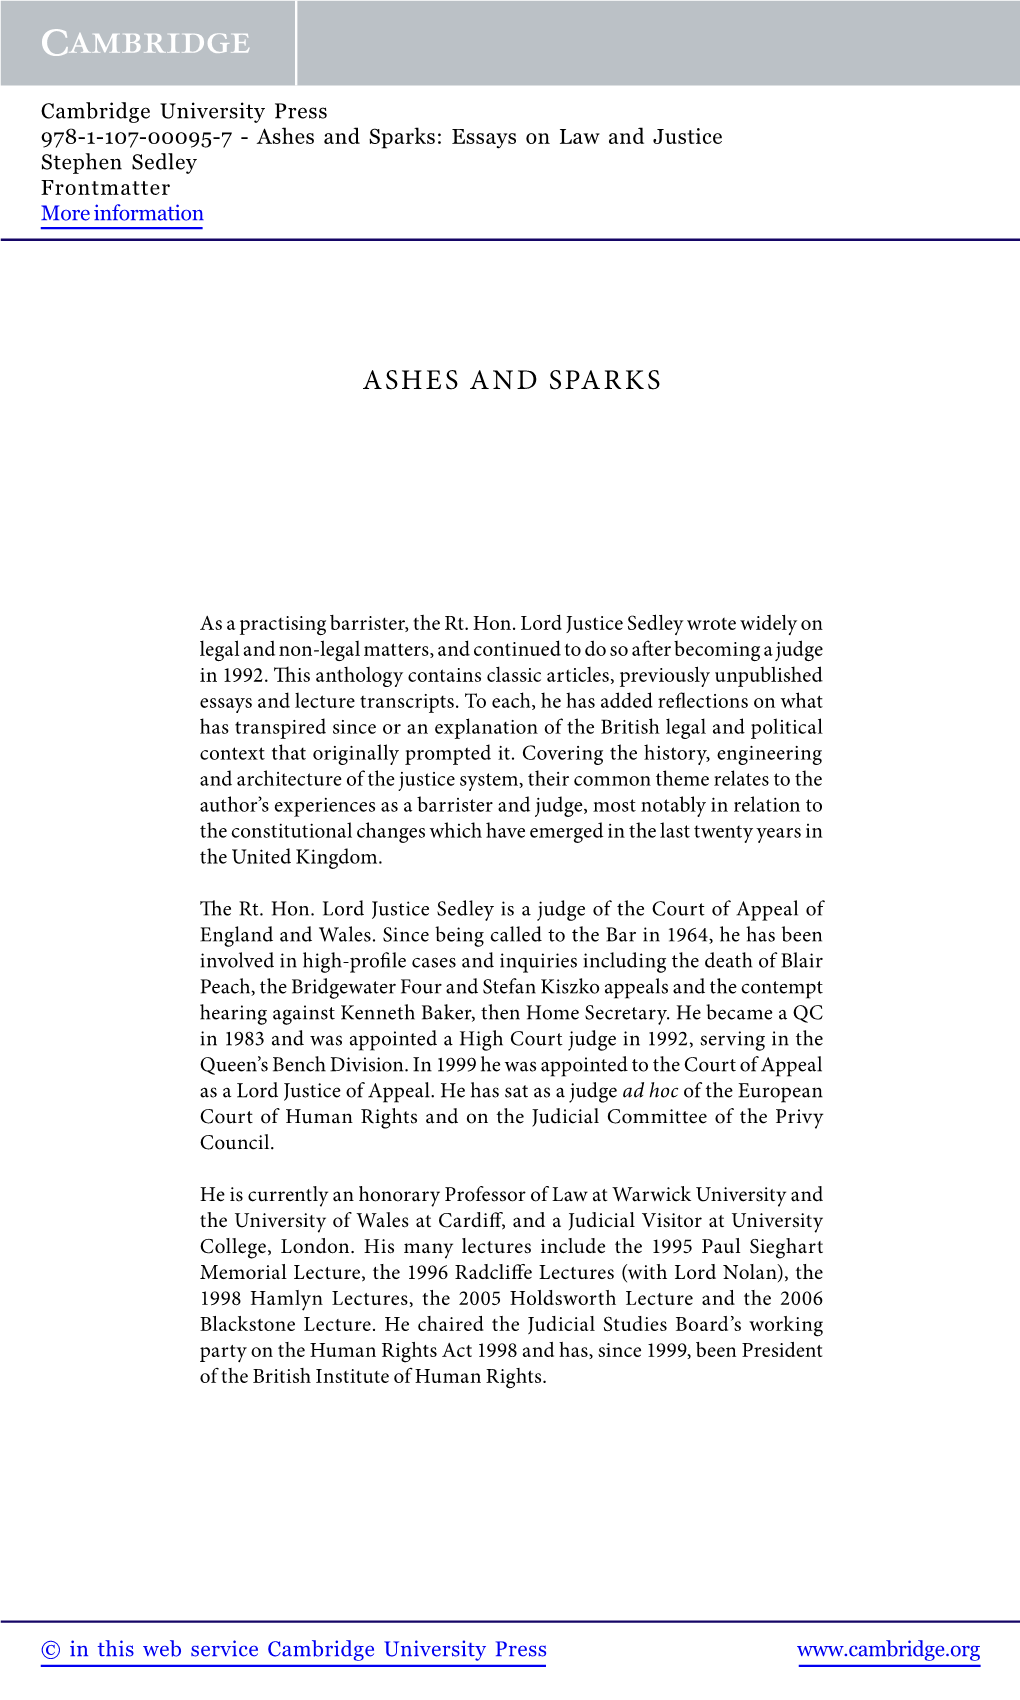 Ashes and Sparks: Essays on Law and Justice Stephen Sedley Frontmatter More Information